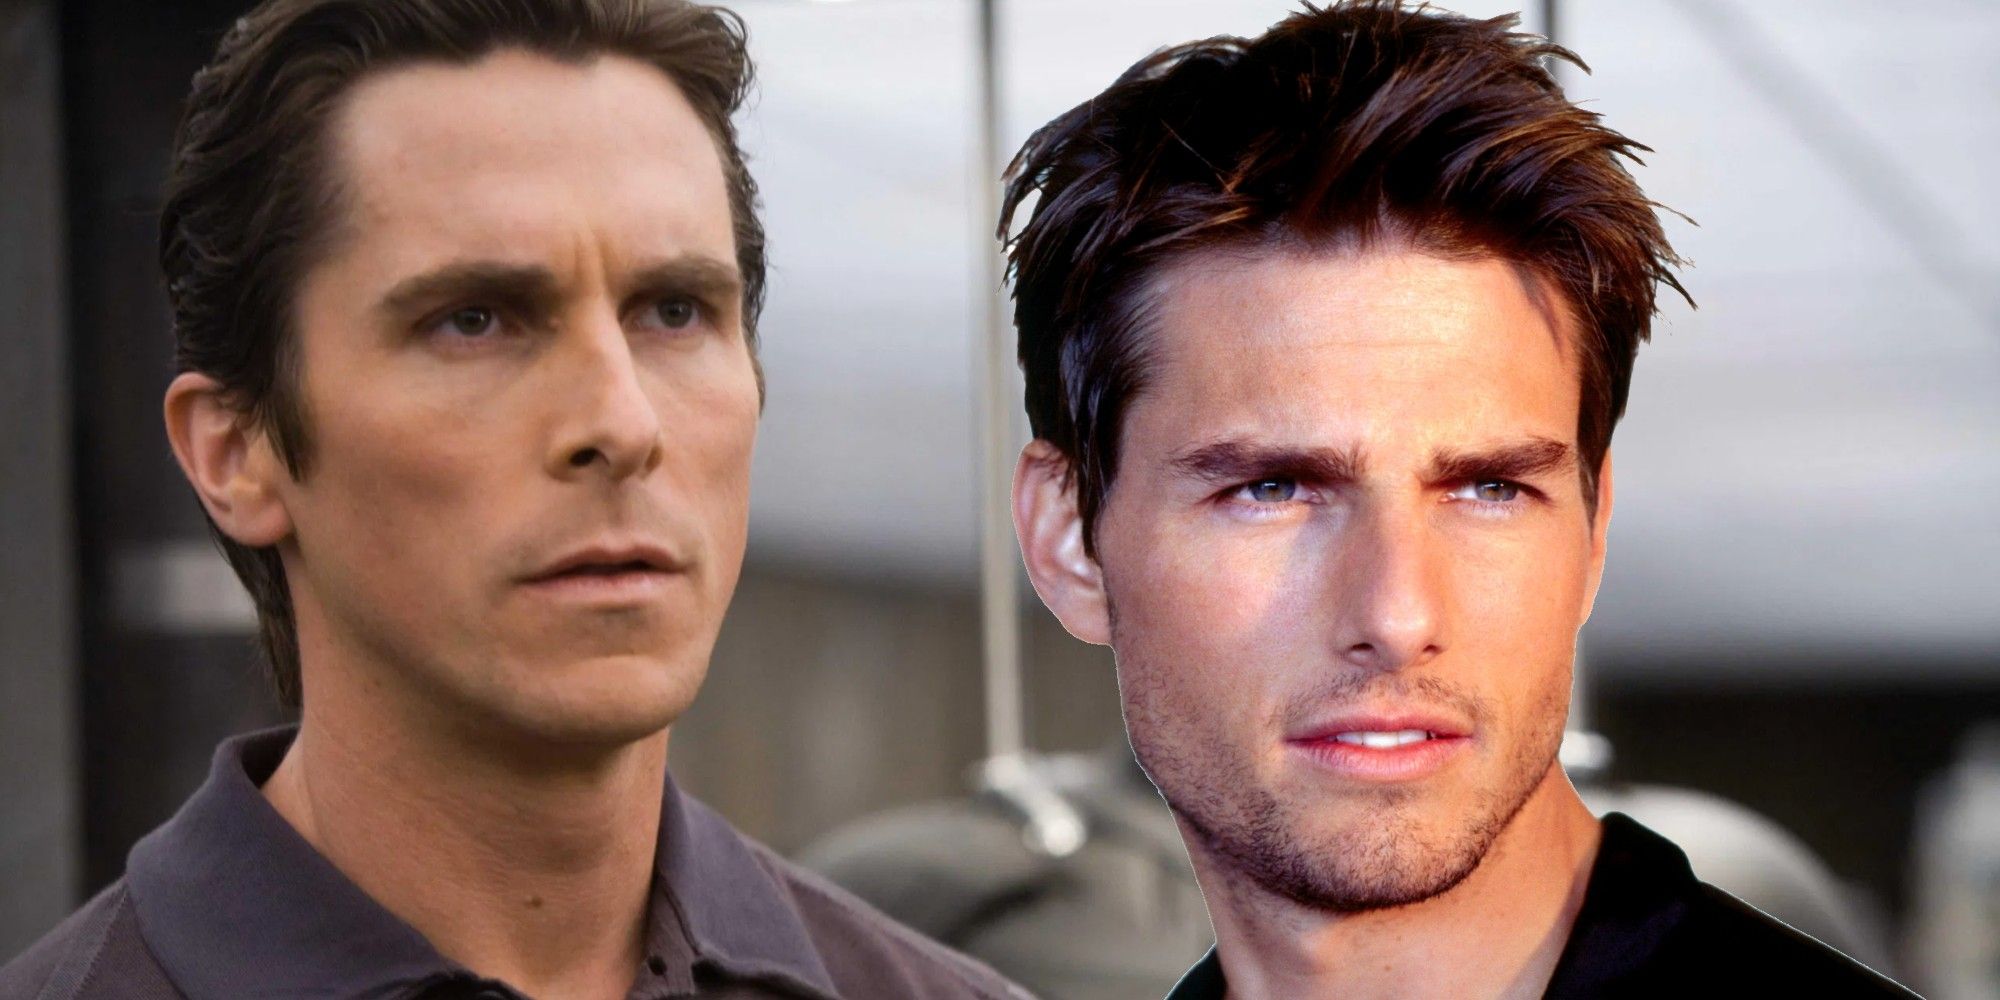 Tom Cruise & Christian Bale's On-Set Rants Edited Into One Wild Argument